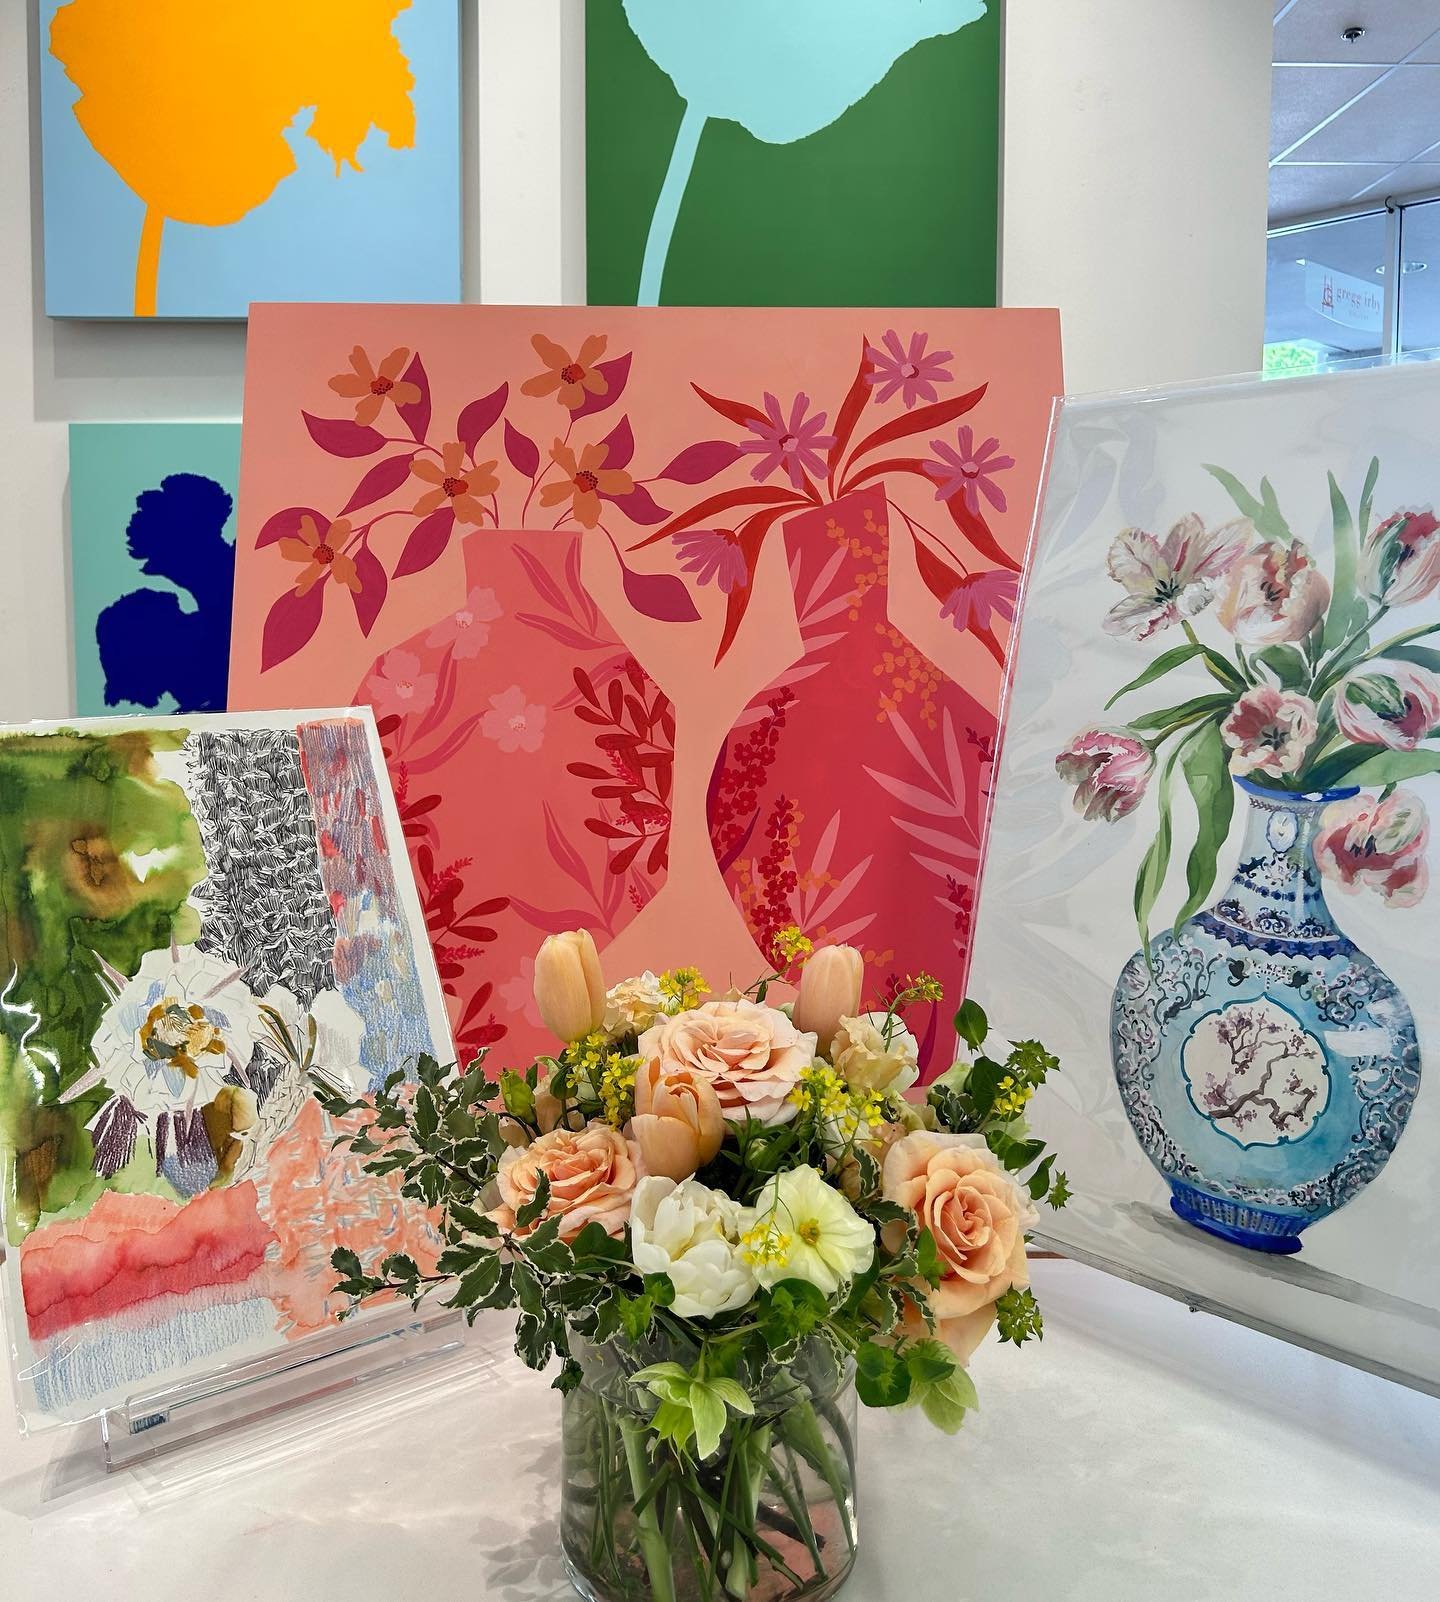 art imitates life here at gregg irby gallery!!!

beautiful paintings by Amy Wright, Bailey Schmidt, Gretchen Kelly, and Evan Mooney &amp; featuring a gorgeous floral arrangement from local atl florist @east.pinedesigns 

we are open today until 6 and